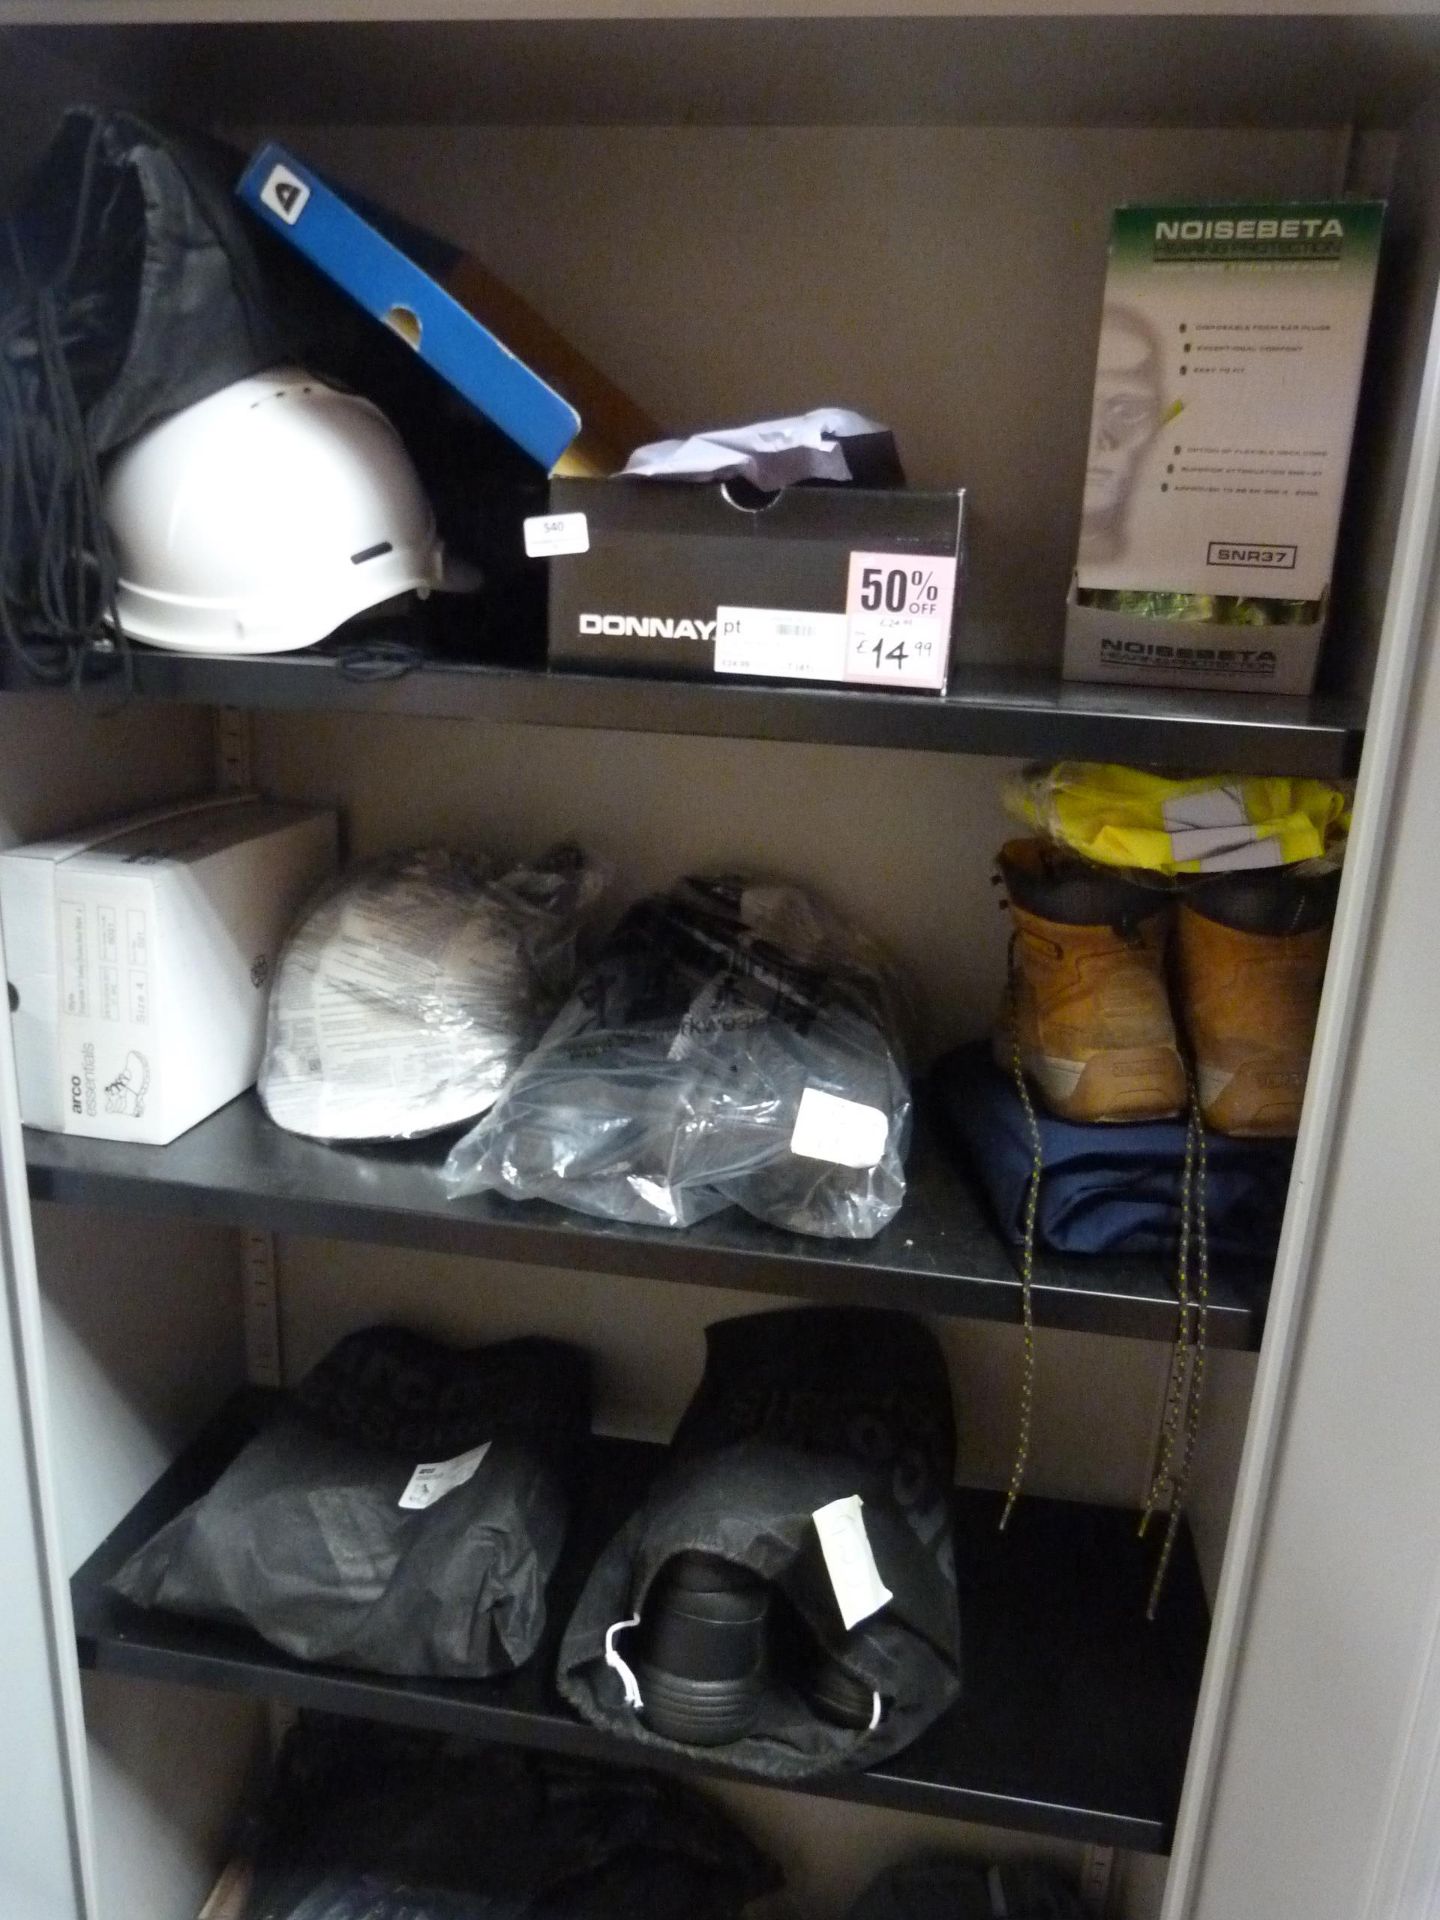 *Assorted New Work Boots and PPE Including Hardhats, Overalls, etc.